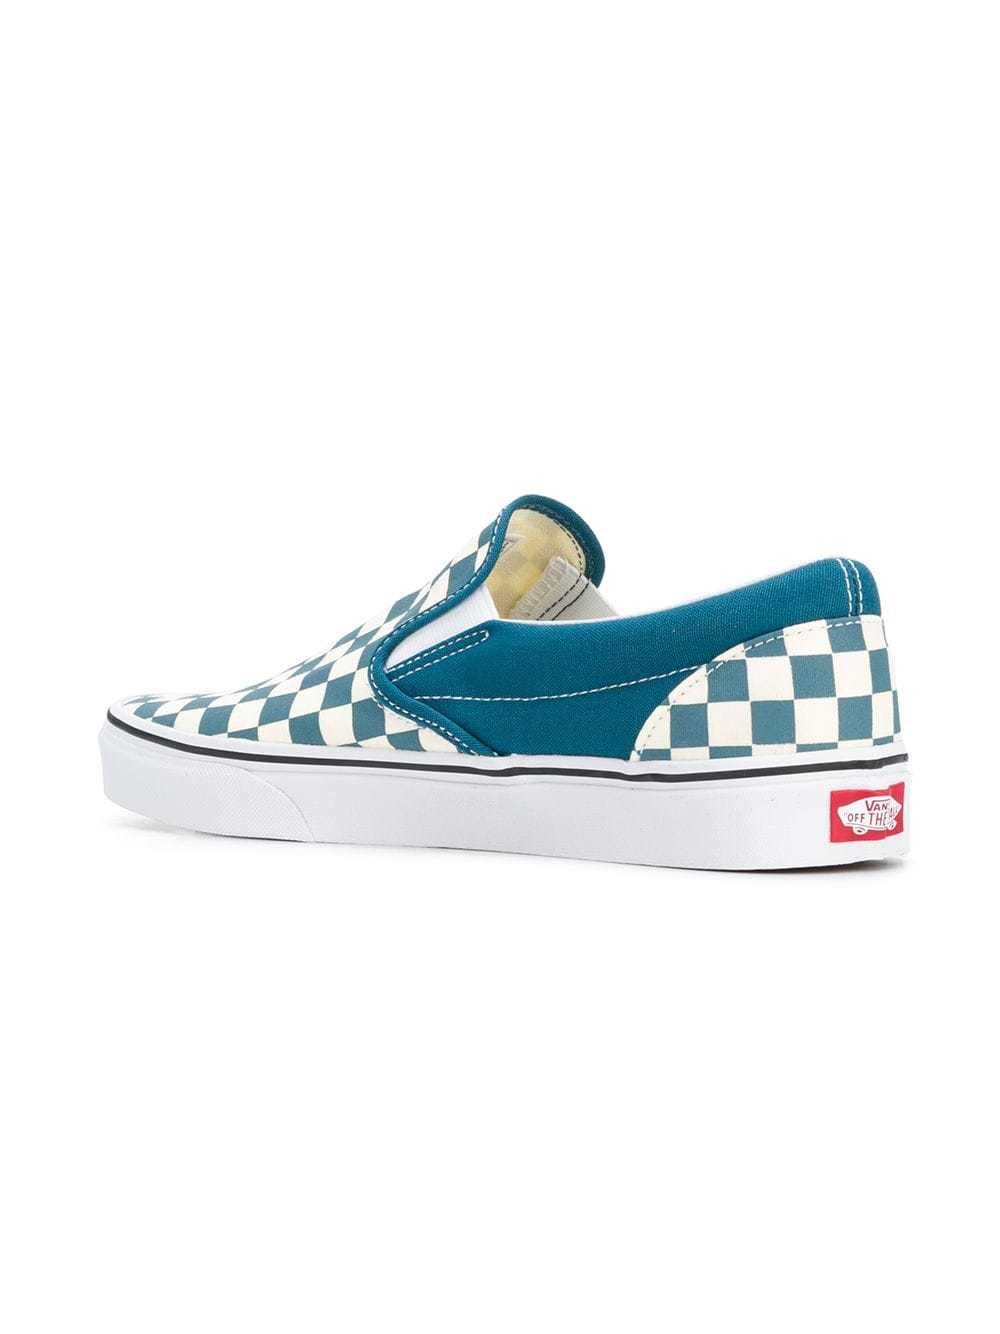 checkerboard vans different colors